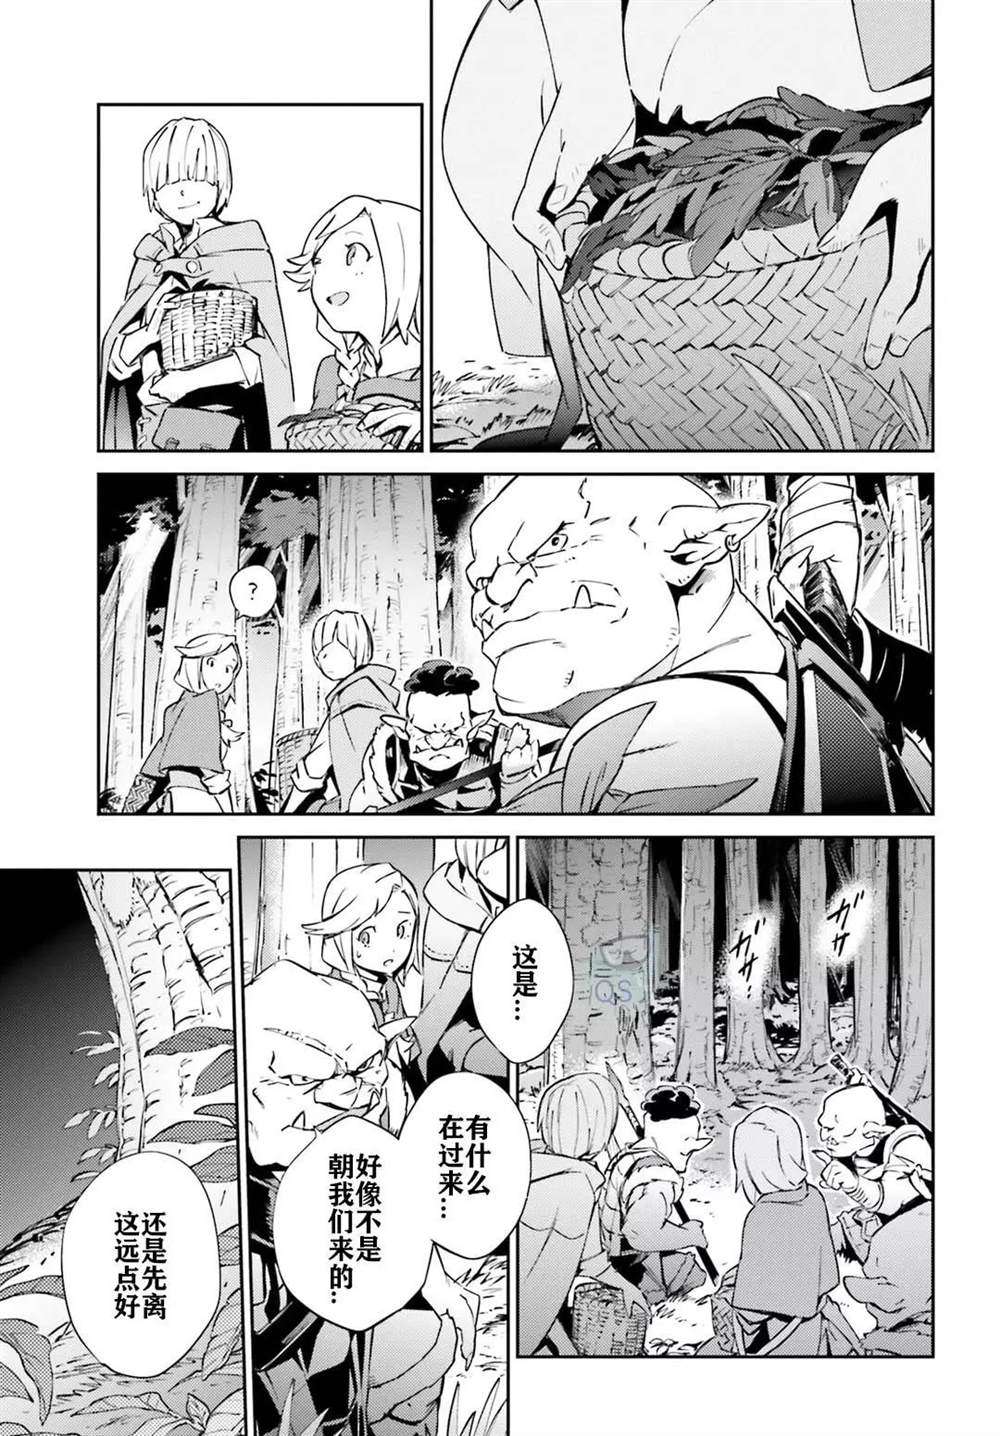 OVERLORD - 第54話 - 1